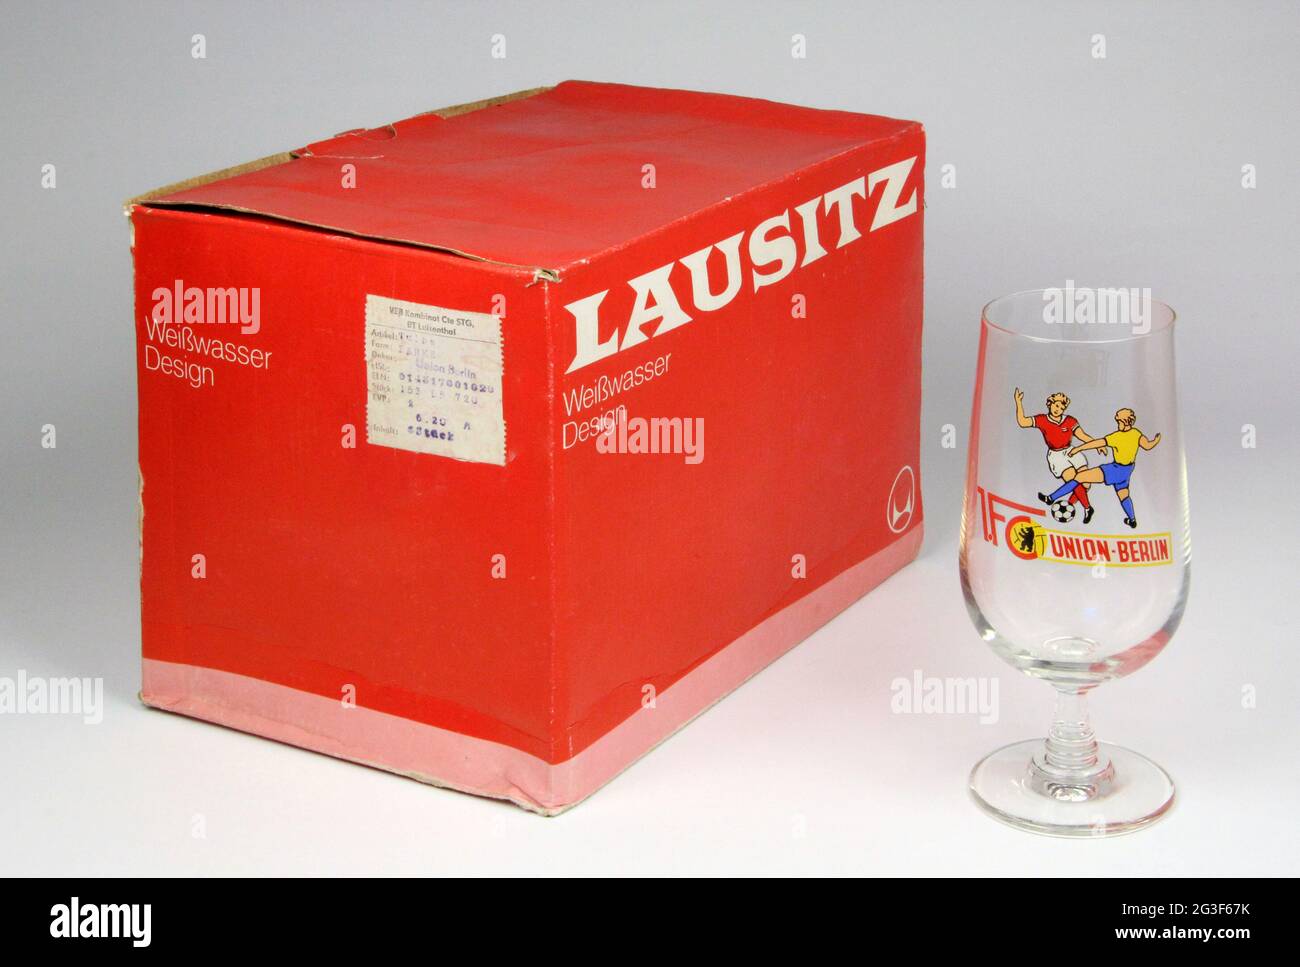 household, household appliance, showpackage for beer glasses 1st football club Union Berlin, ADDITIONAL-RIGHTS-CLEARANCE-INFO-NOT-AVAILABLE Stock Photo